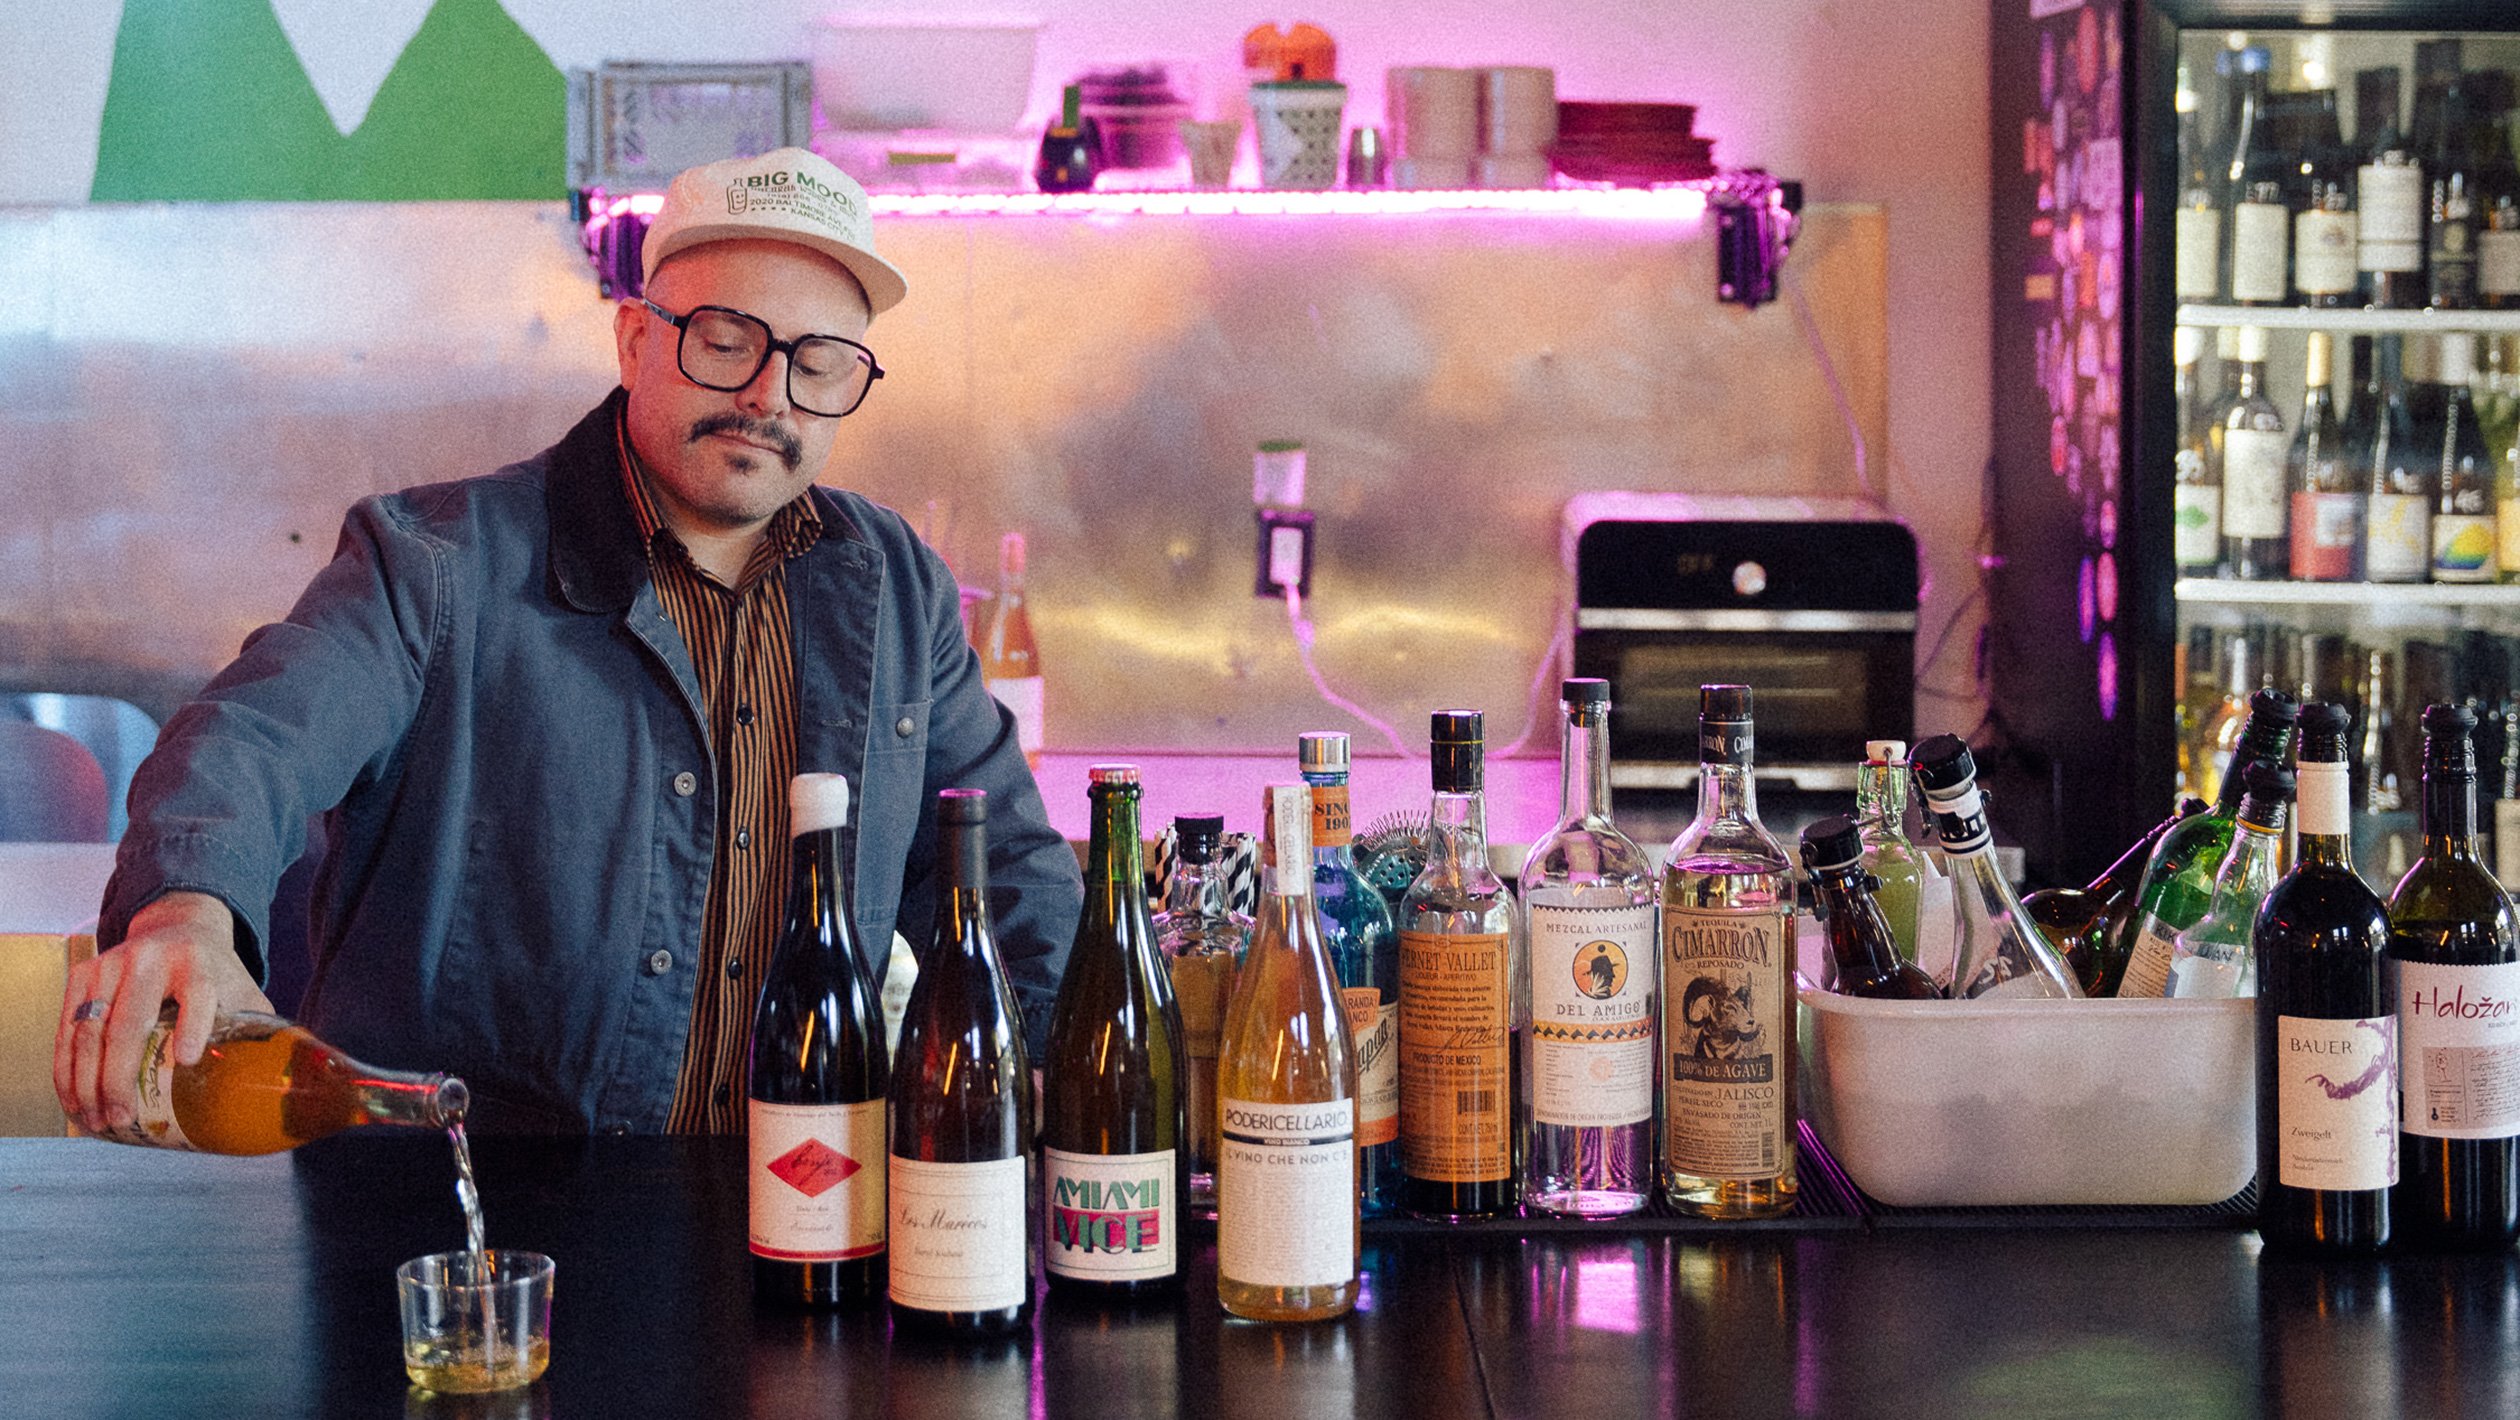 Richard Garcia poses behind a bar laid with bottles